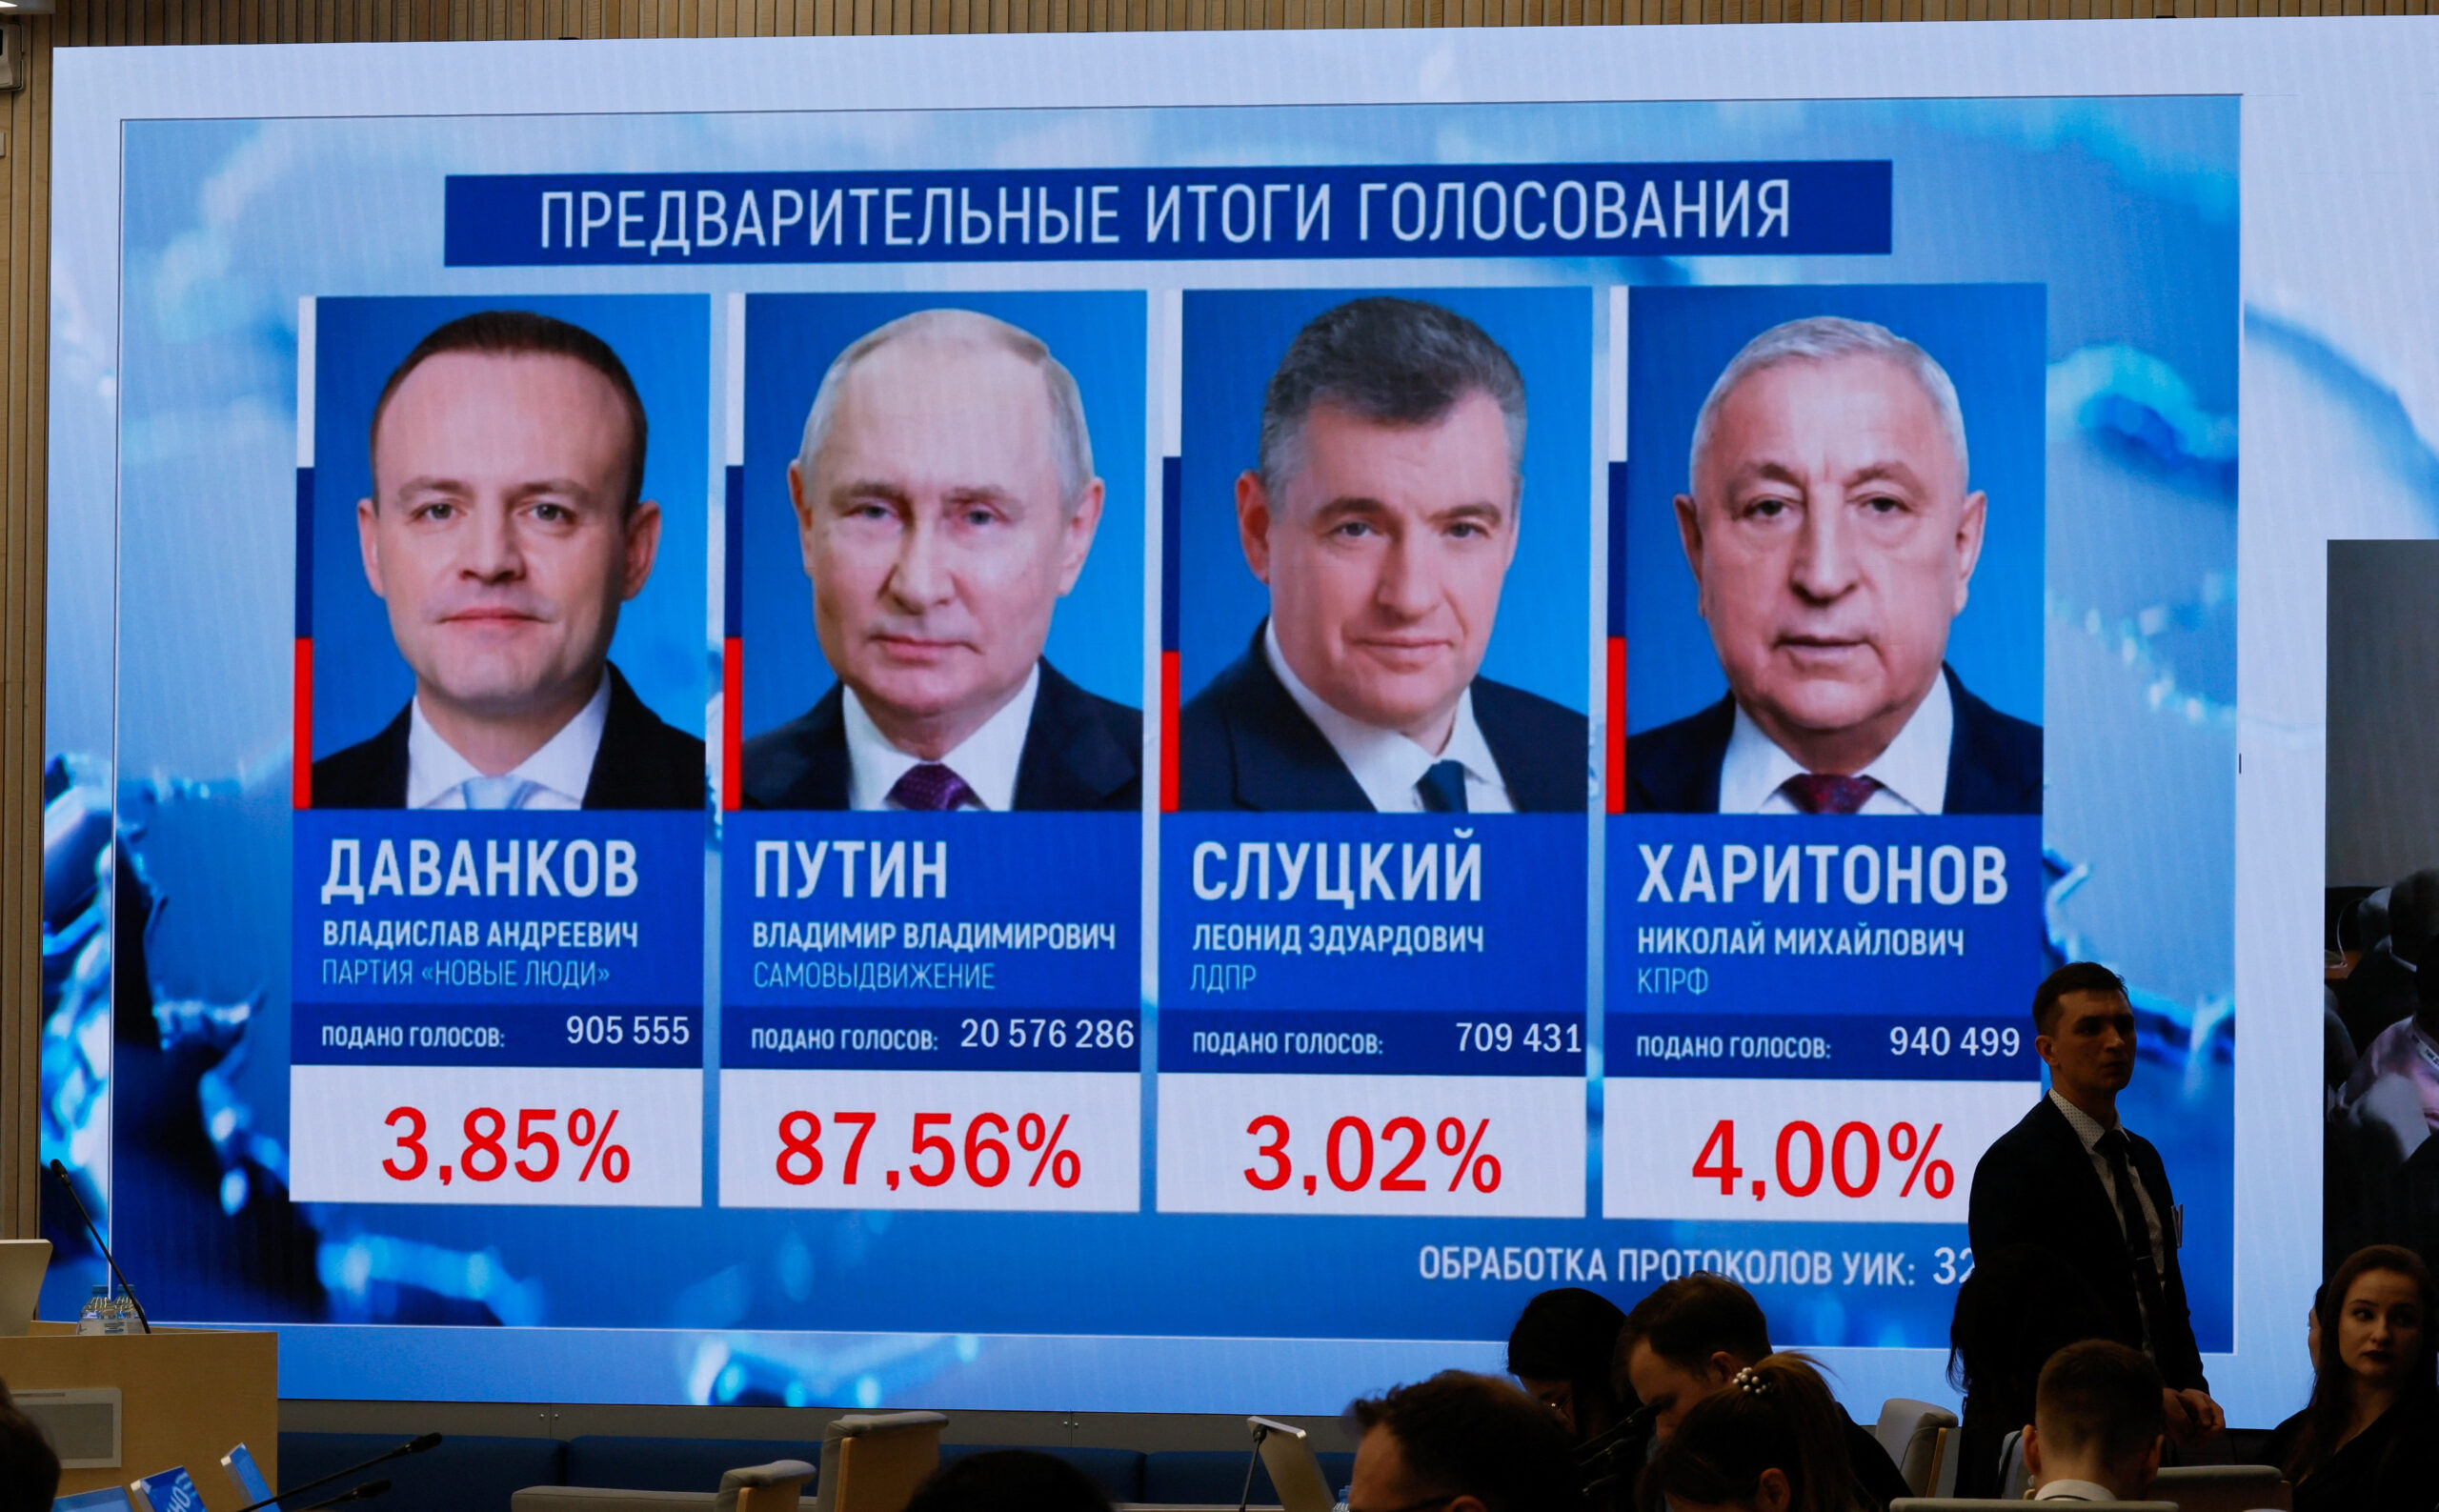 Putin wins Russia poll in a landslide, early results show